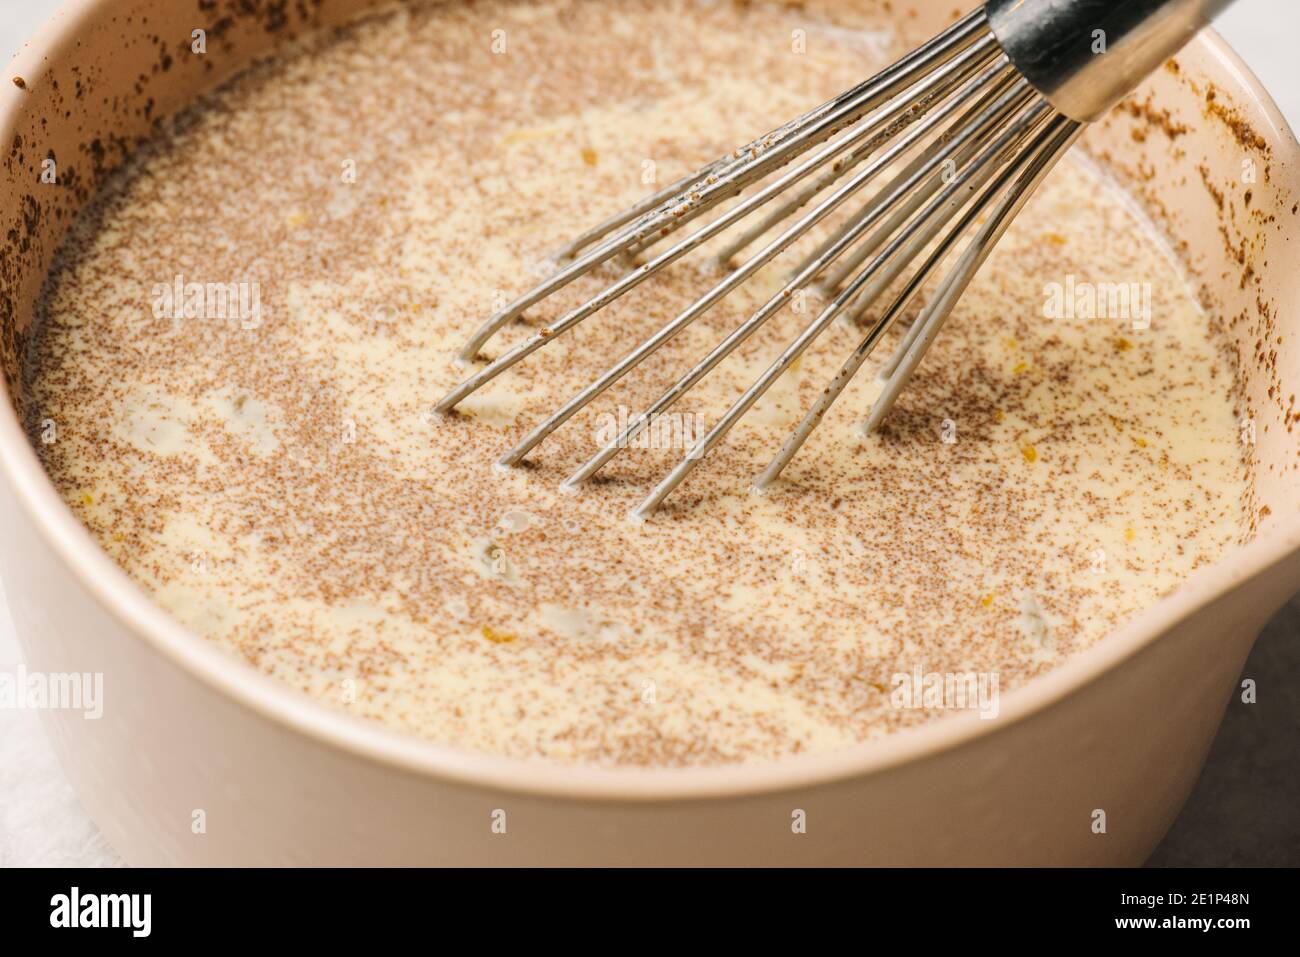 https://c8.alamy.com/comp/2E1P48N/french-toast-egg-bath-with-wire-whisk-2E1P48N.jpg